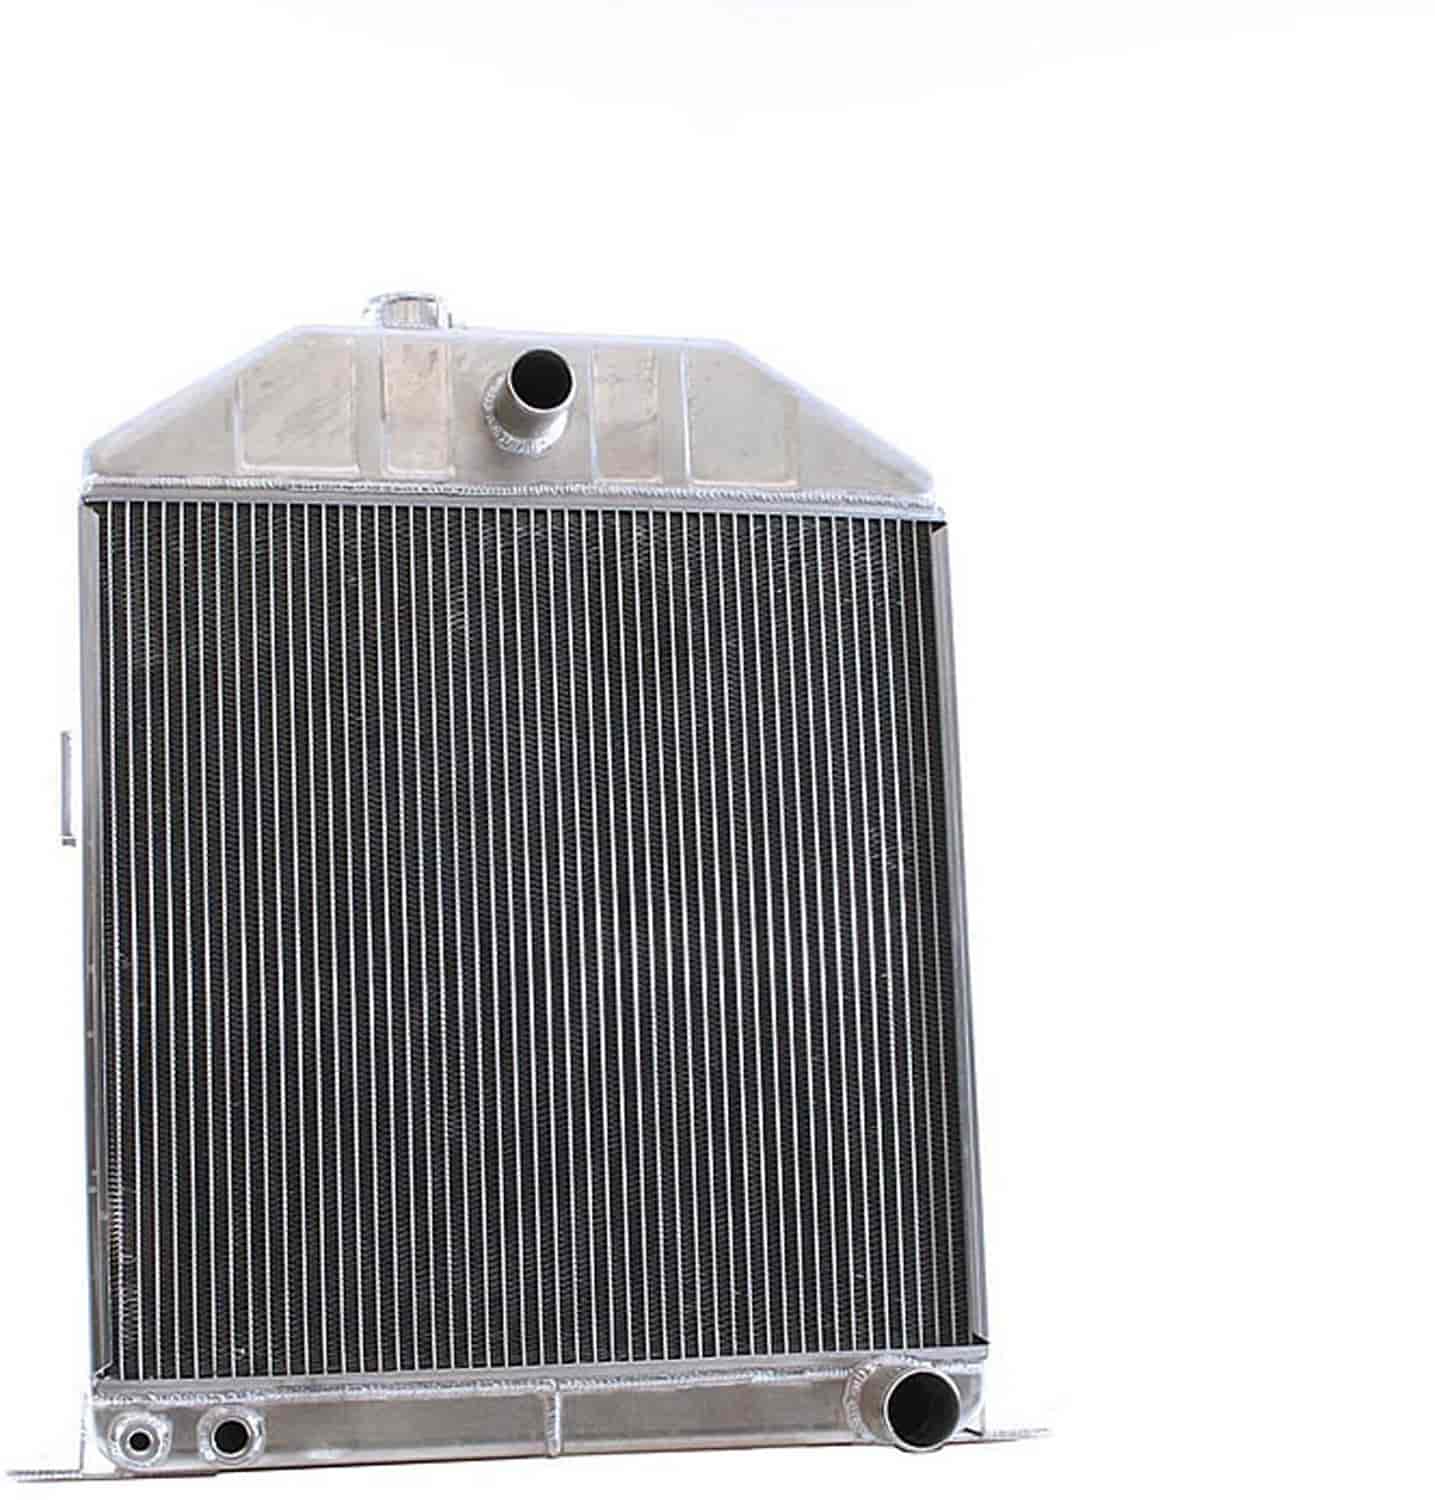 ExactFit Radiator for 1942-1948 Ford/Mercury Car with Early